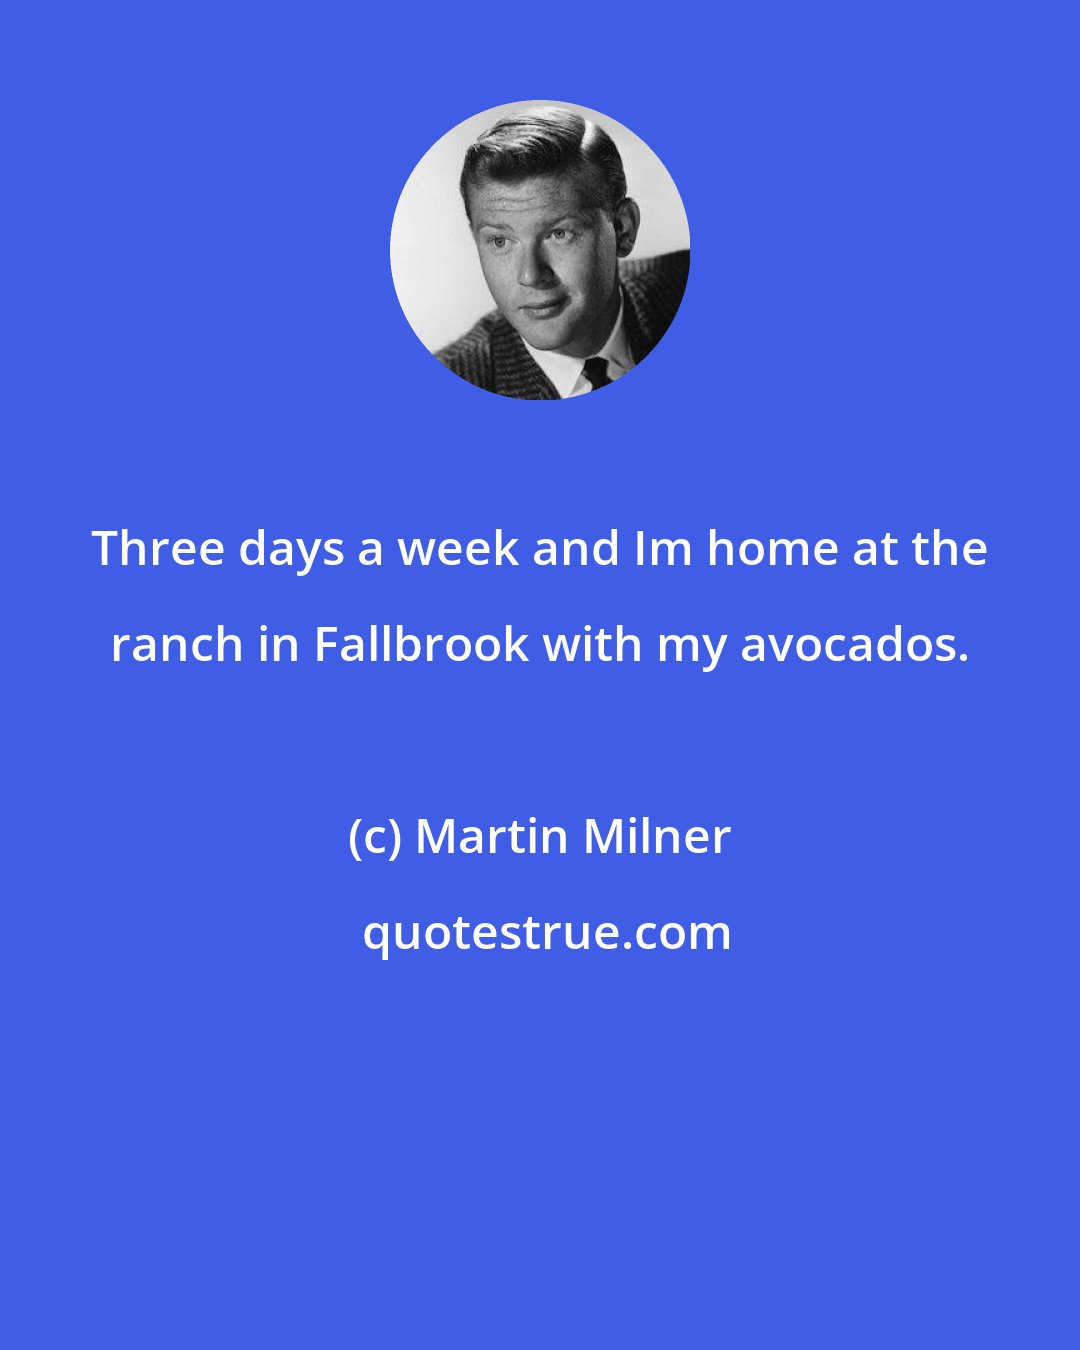 Martin Milner: Three days a week and Im home at the ranch in Fallbrook with my avocados.